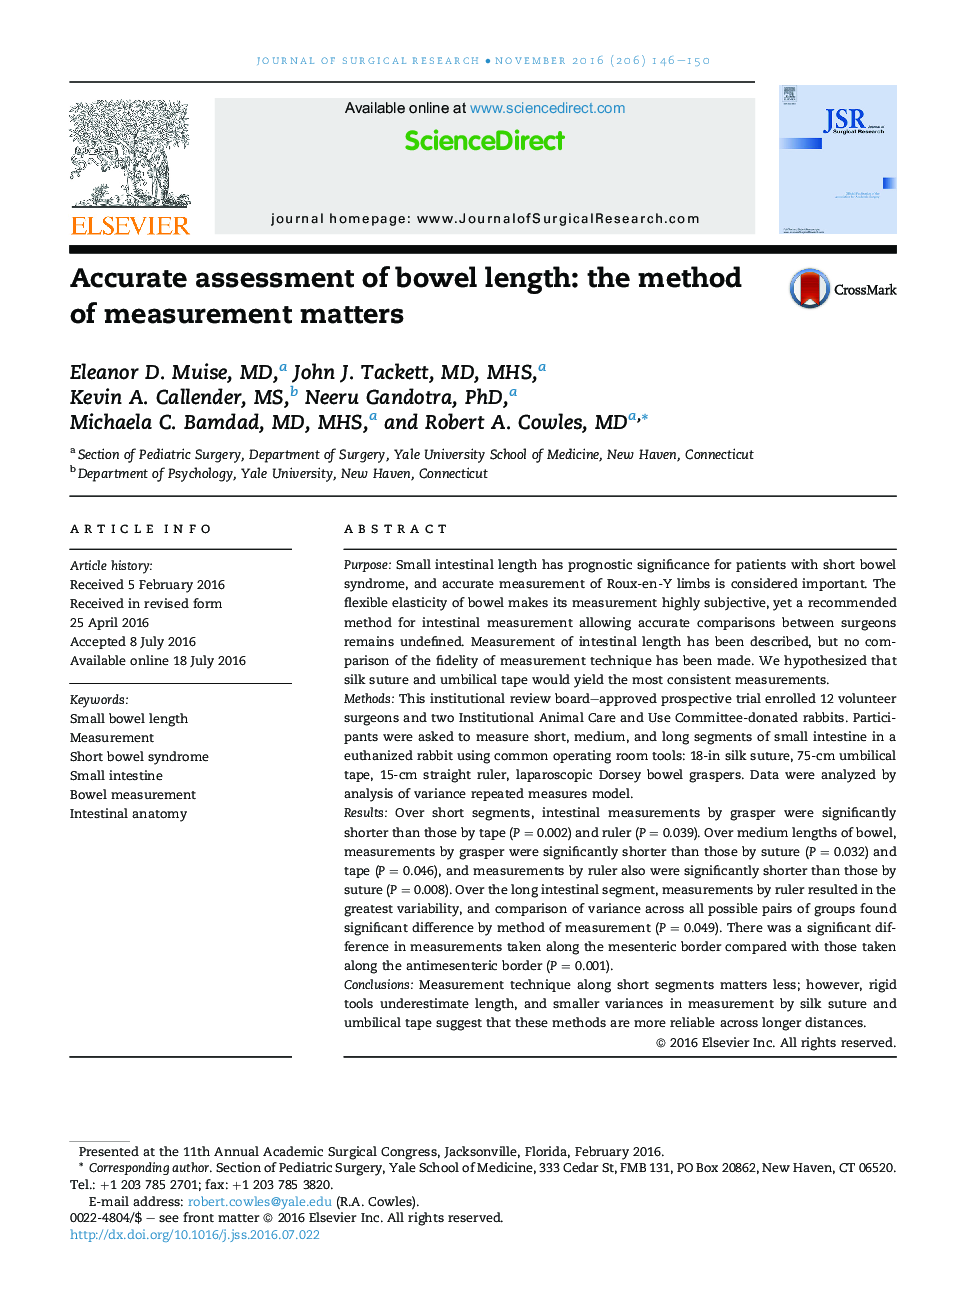 Accurate assessment of bowel length: the method of measurement matters 